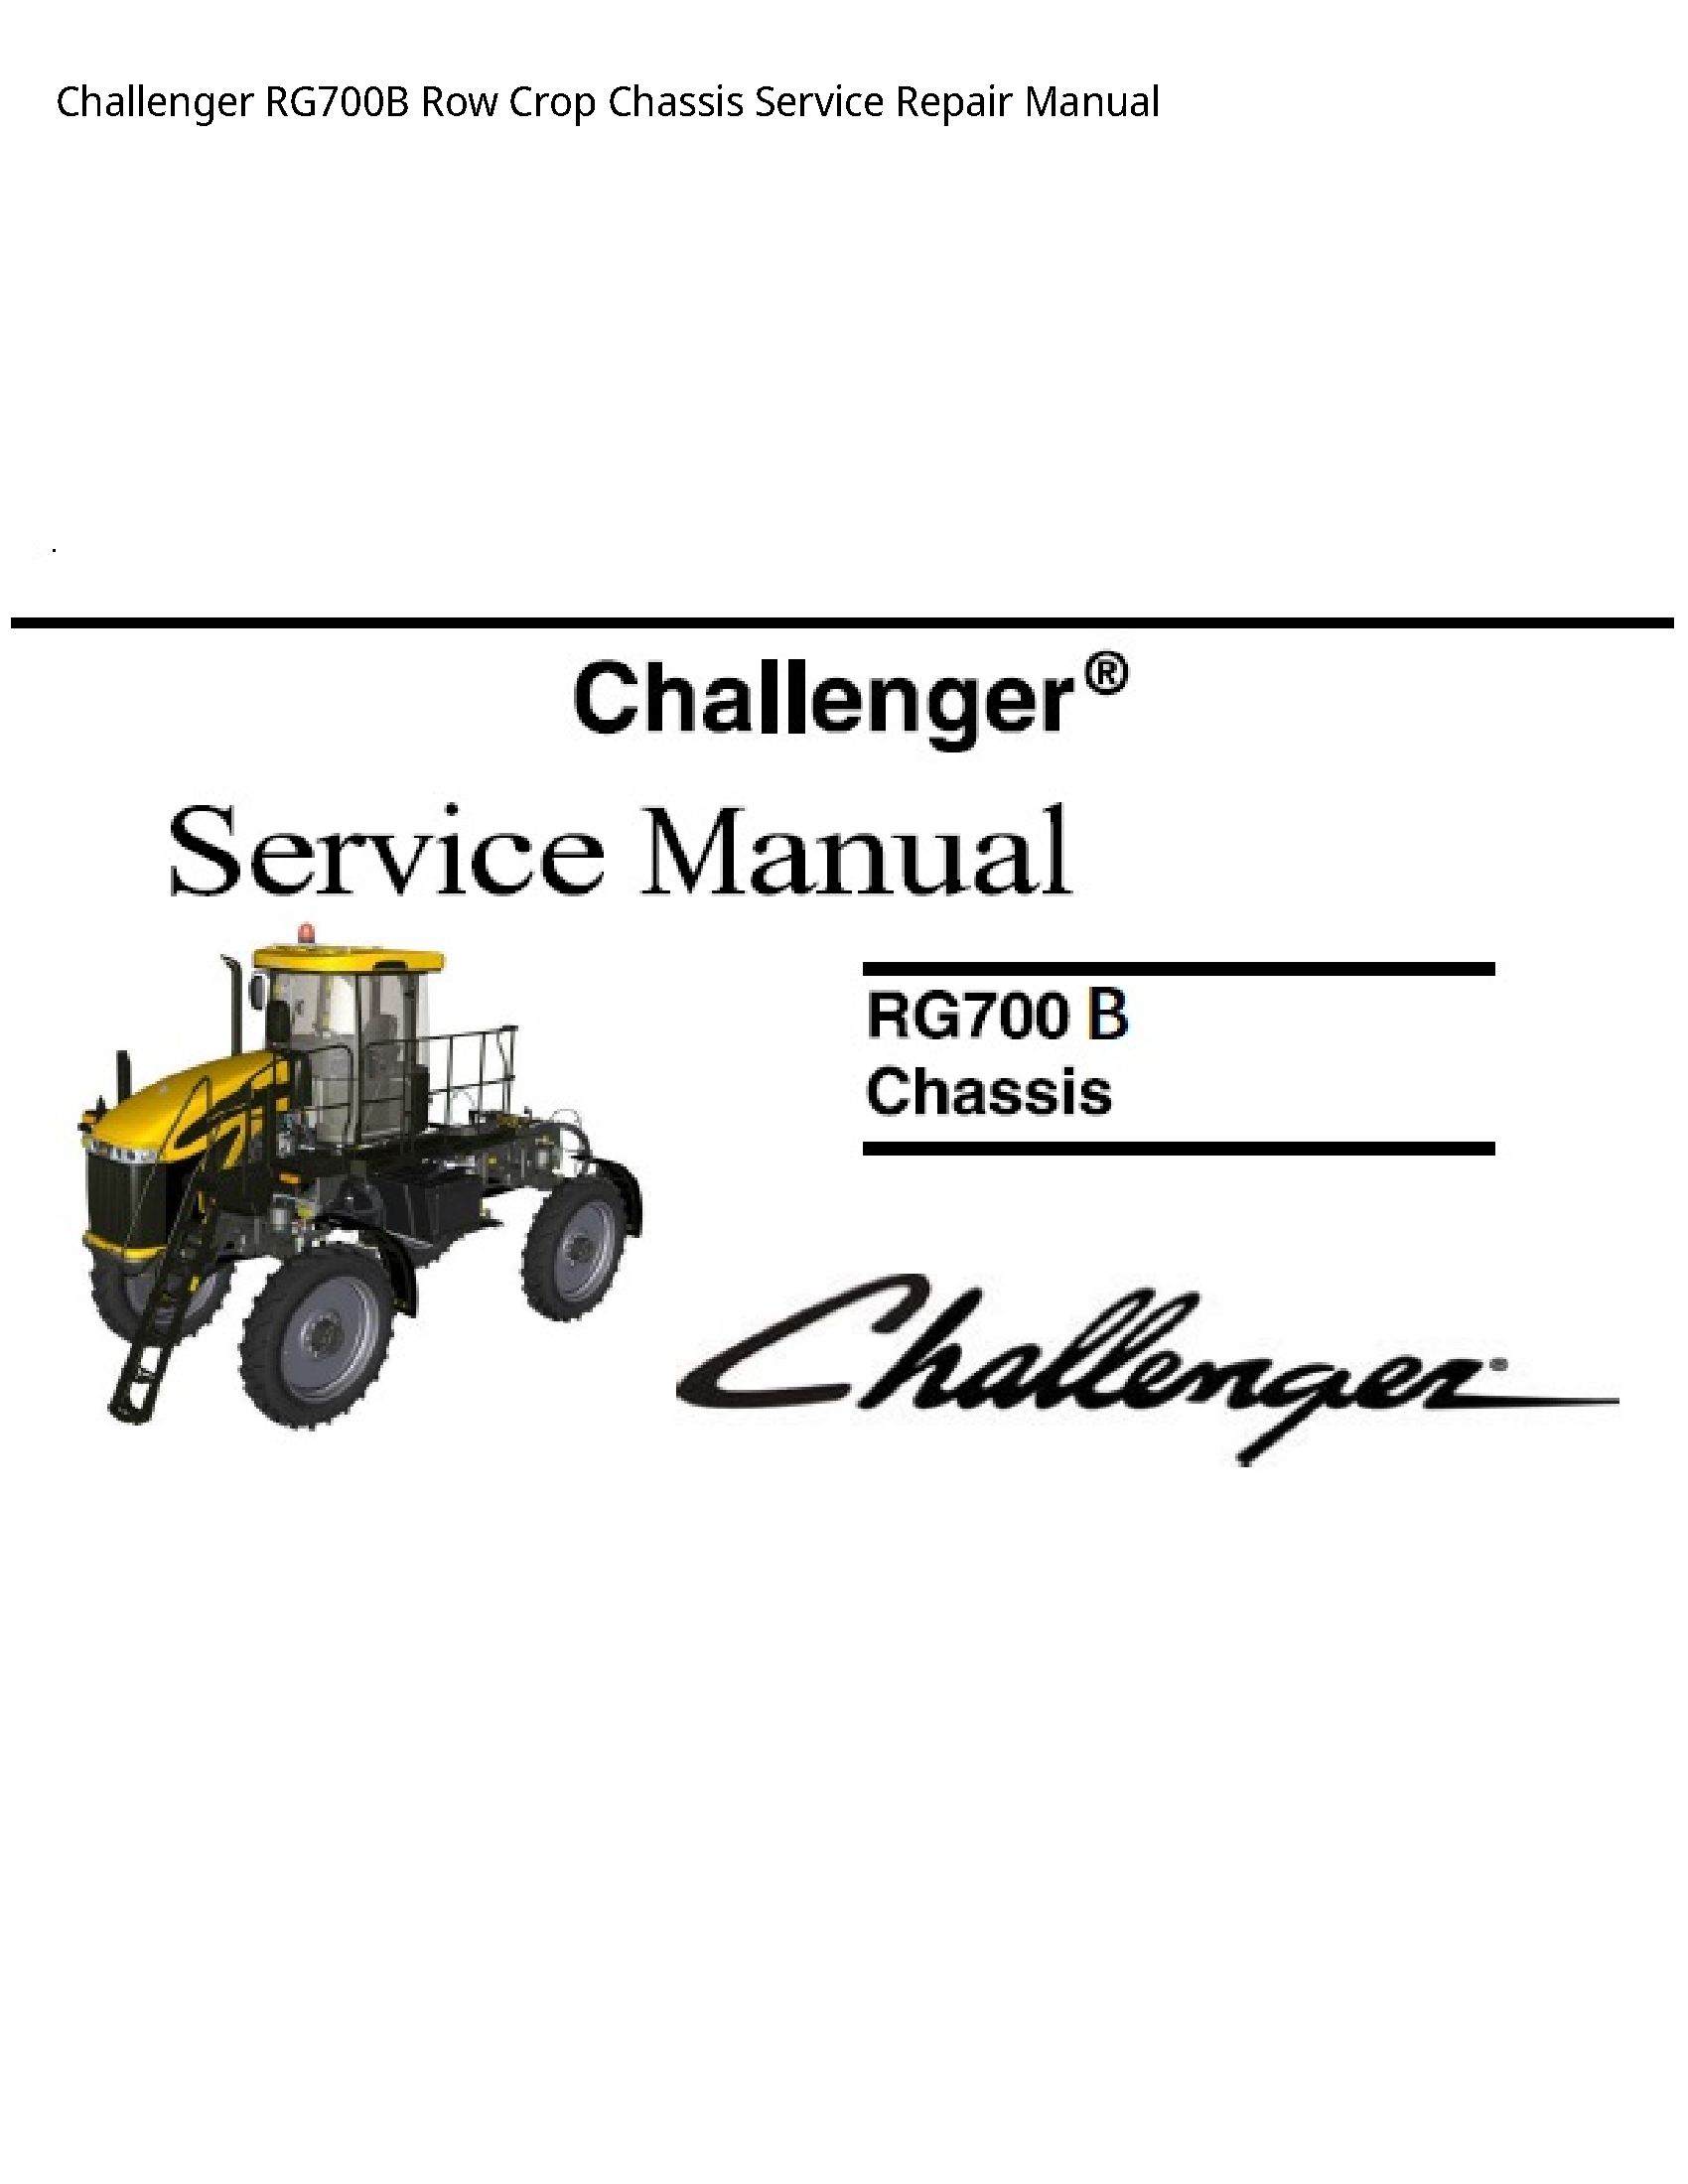 Challenger RG700B Row Crop Chassis manual